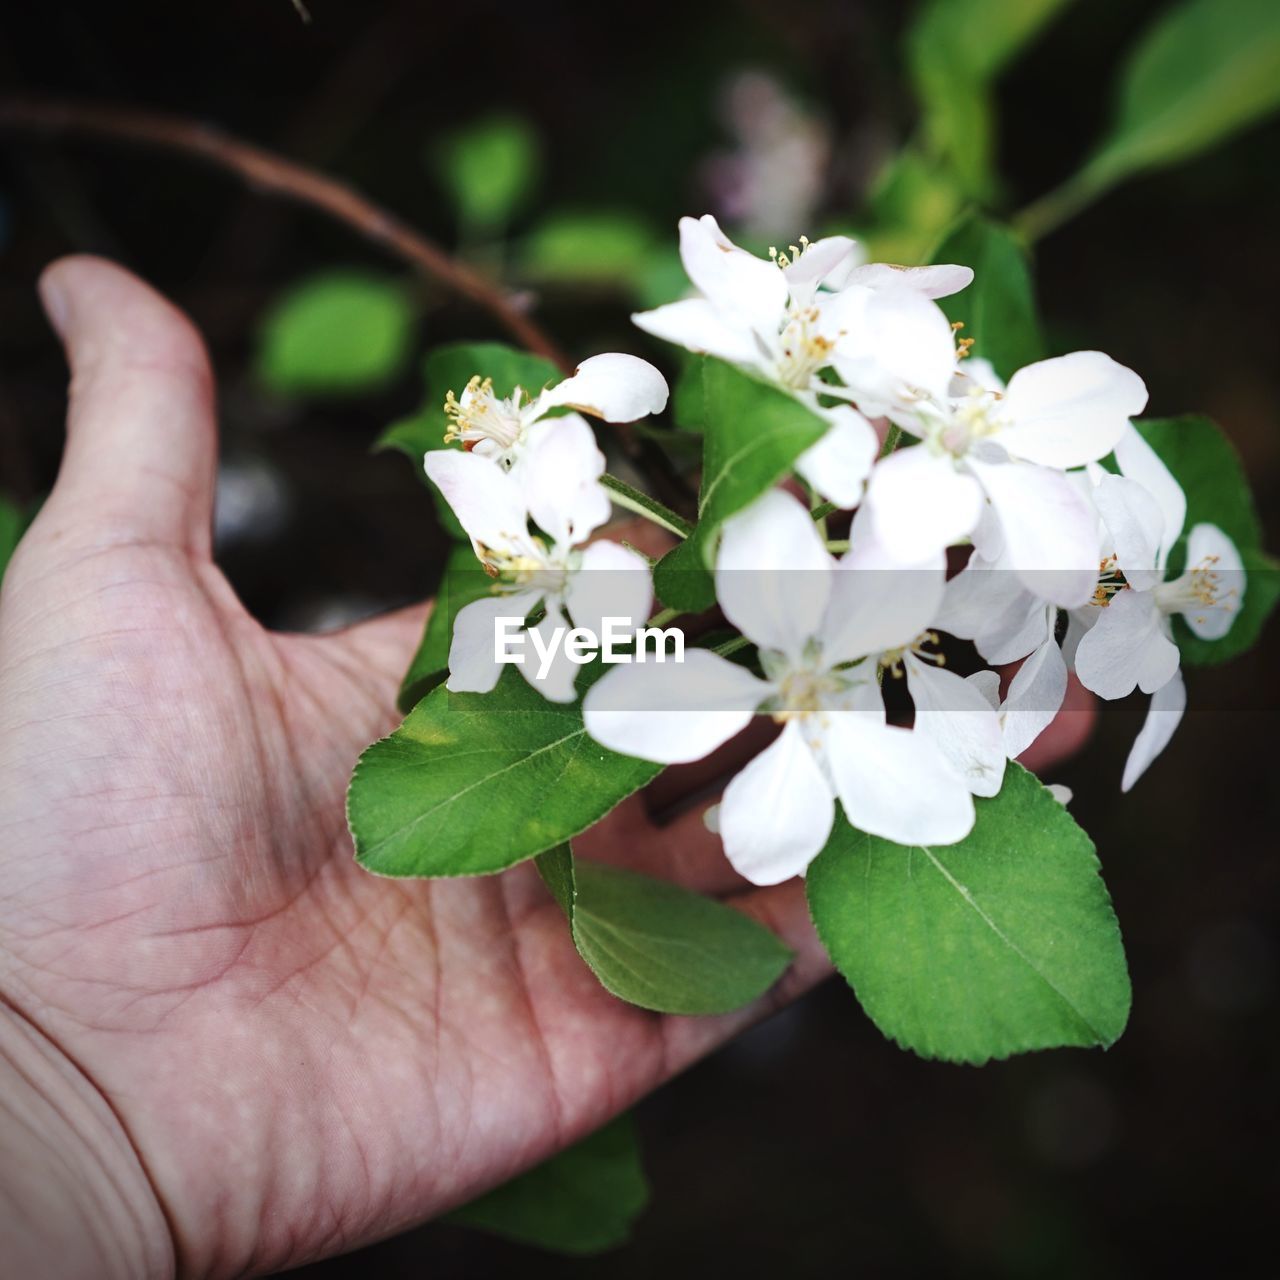 Human hand holding apple blossoms